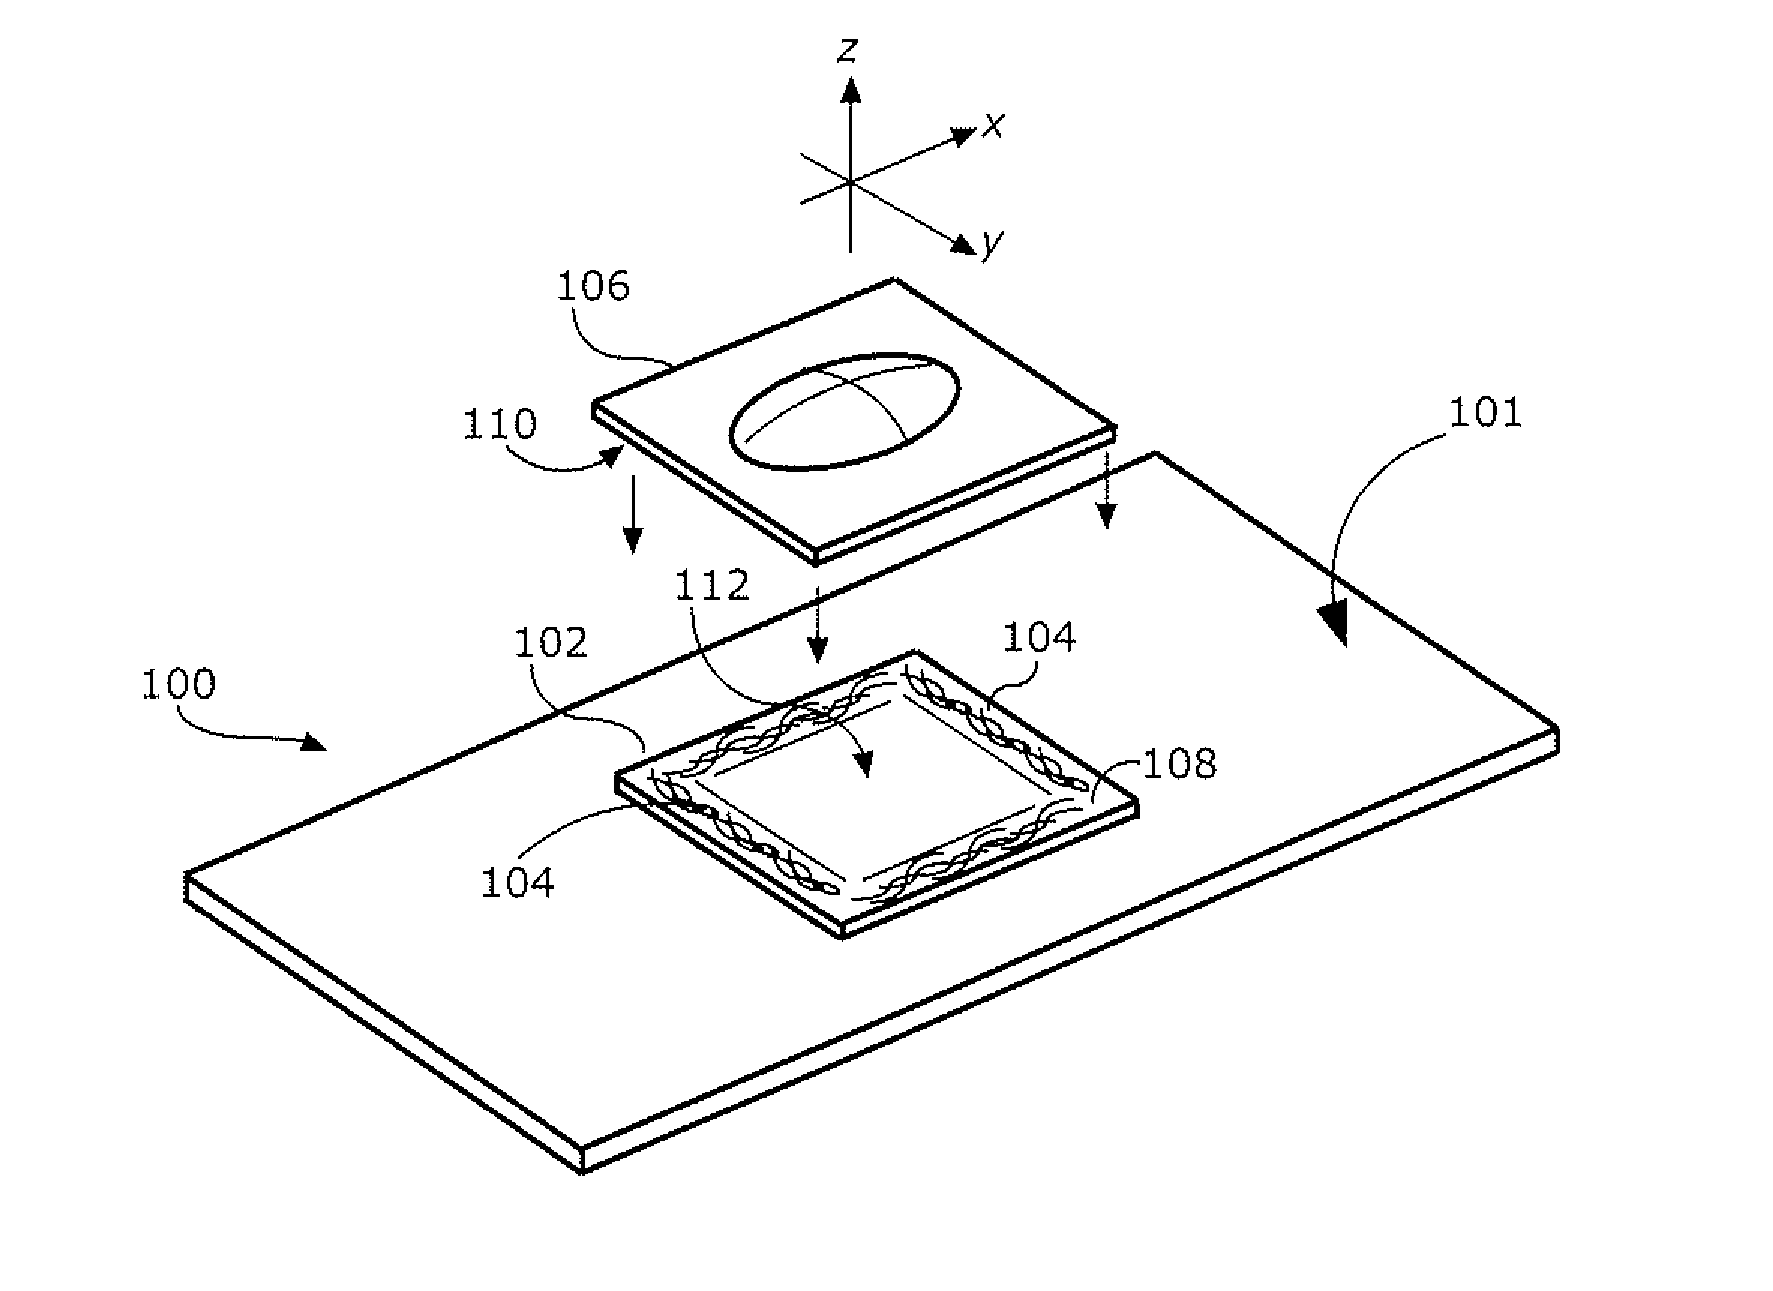 Positioning wafer lenses on electronic imagers